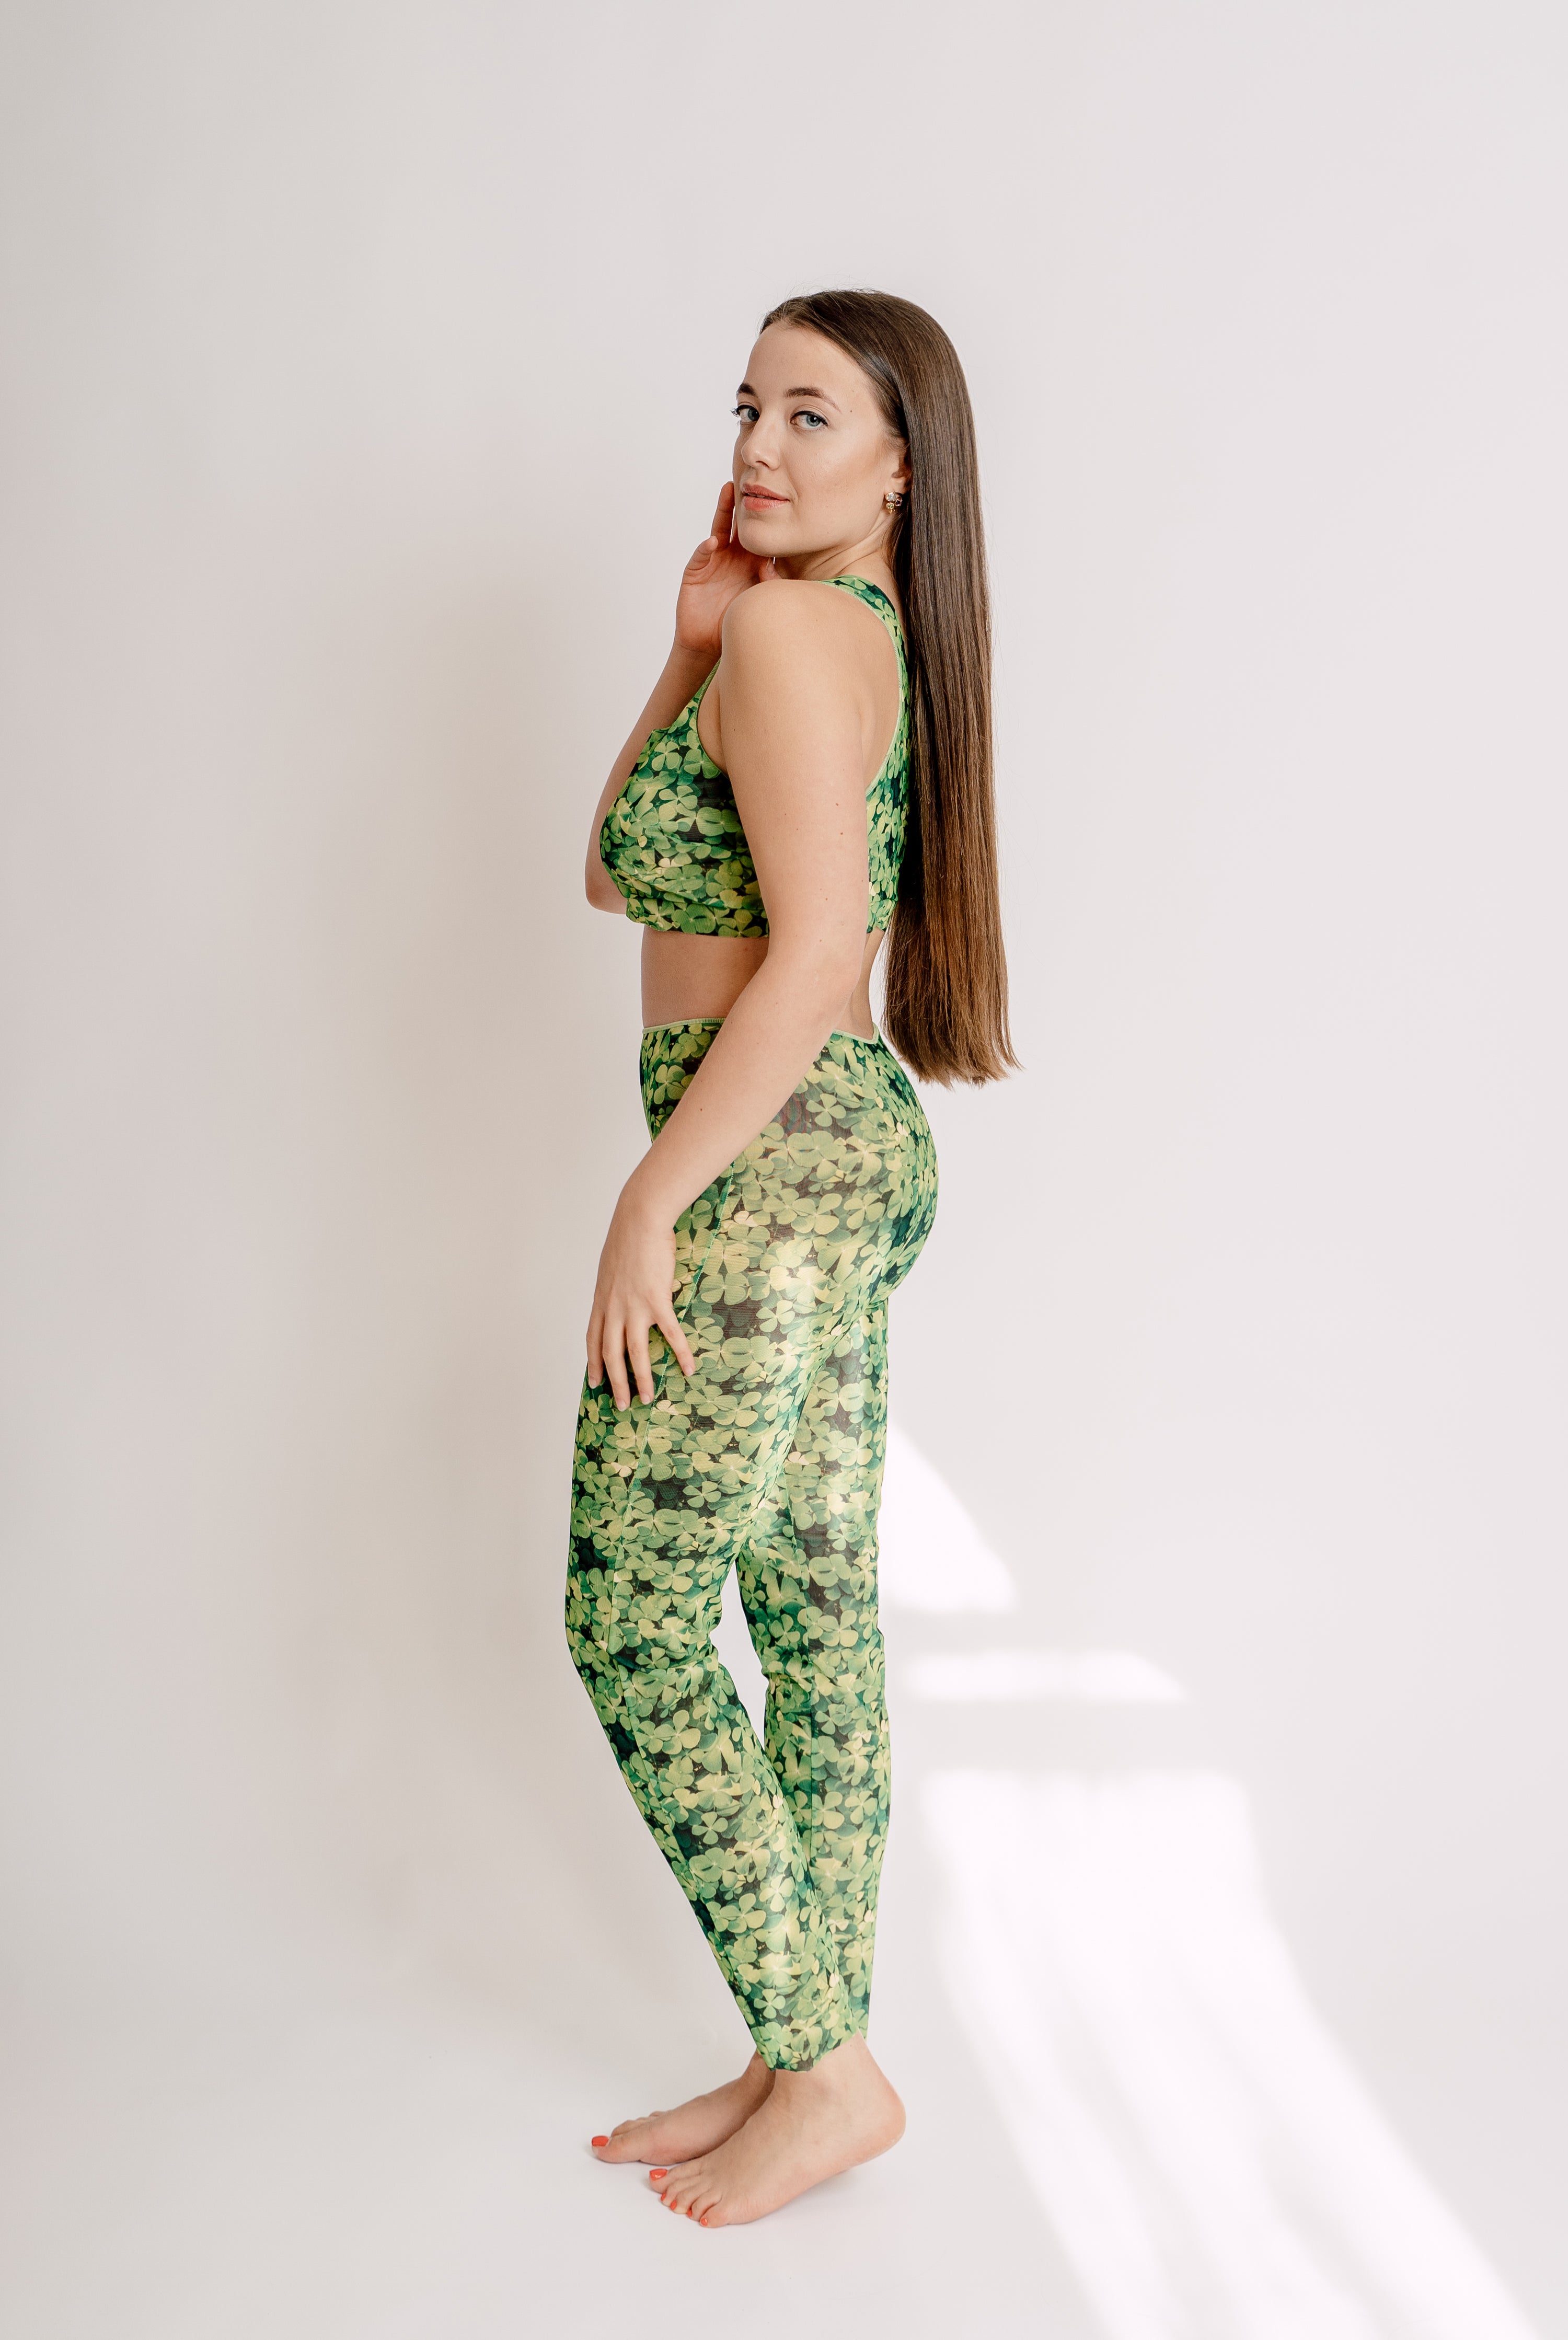 Explore our collection of sustainable smart swimsuits, including a stylish clover print burkini set, all available at a discounted price. Upgrade your beach wardrobe with classic luxury. Shop now for irresistible deals!